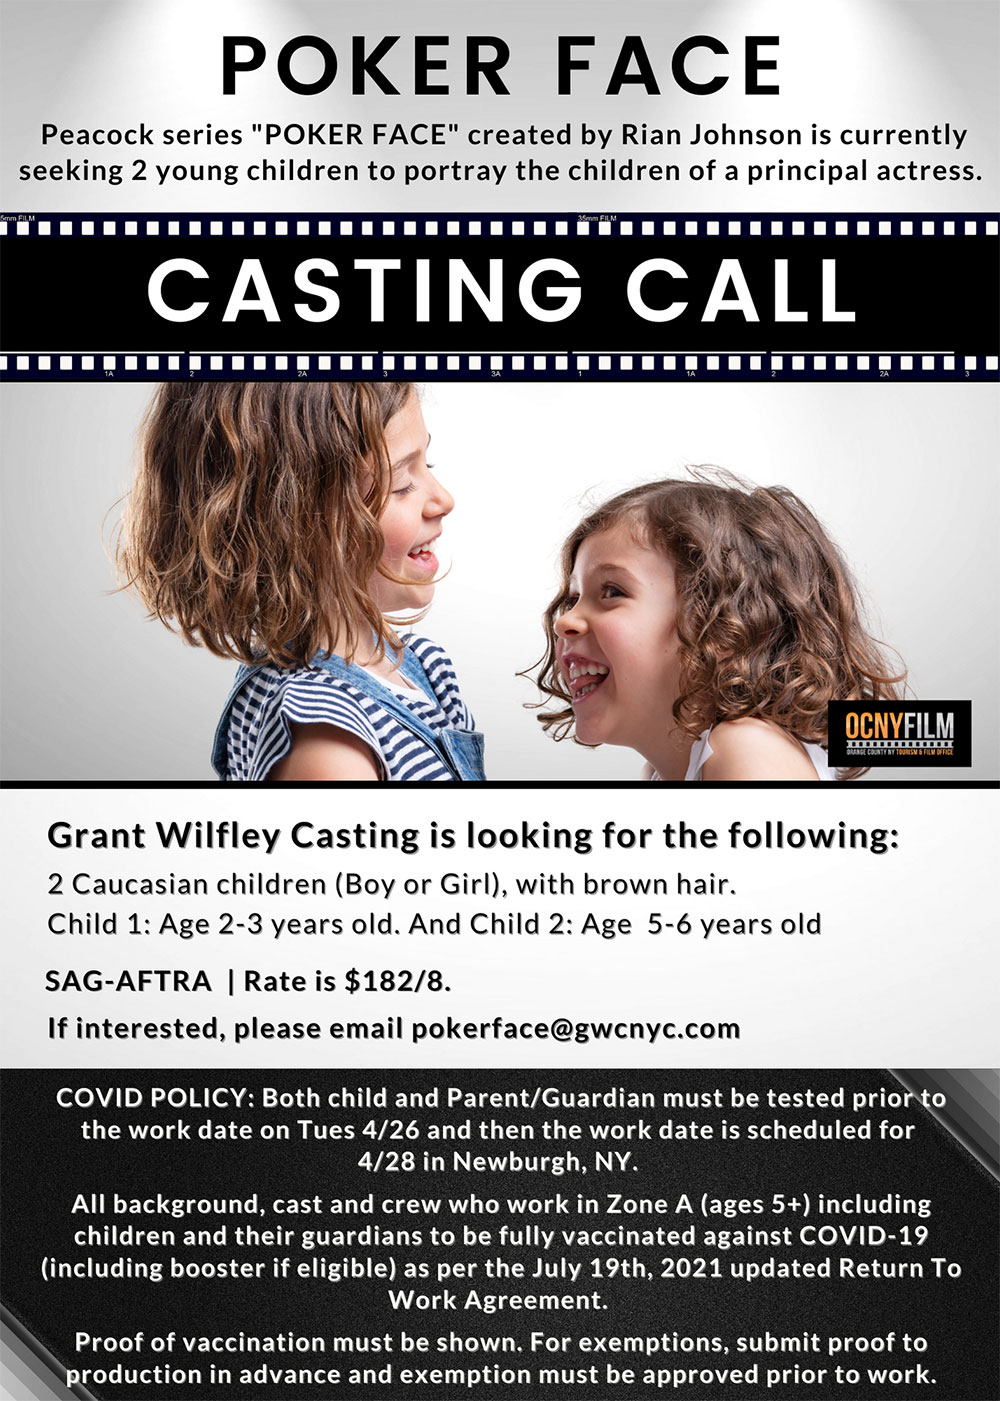 Casting Call For Peacock’s New Series “POKER FACE”.